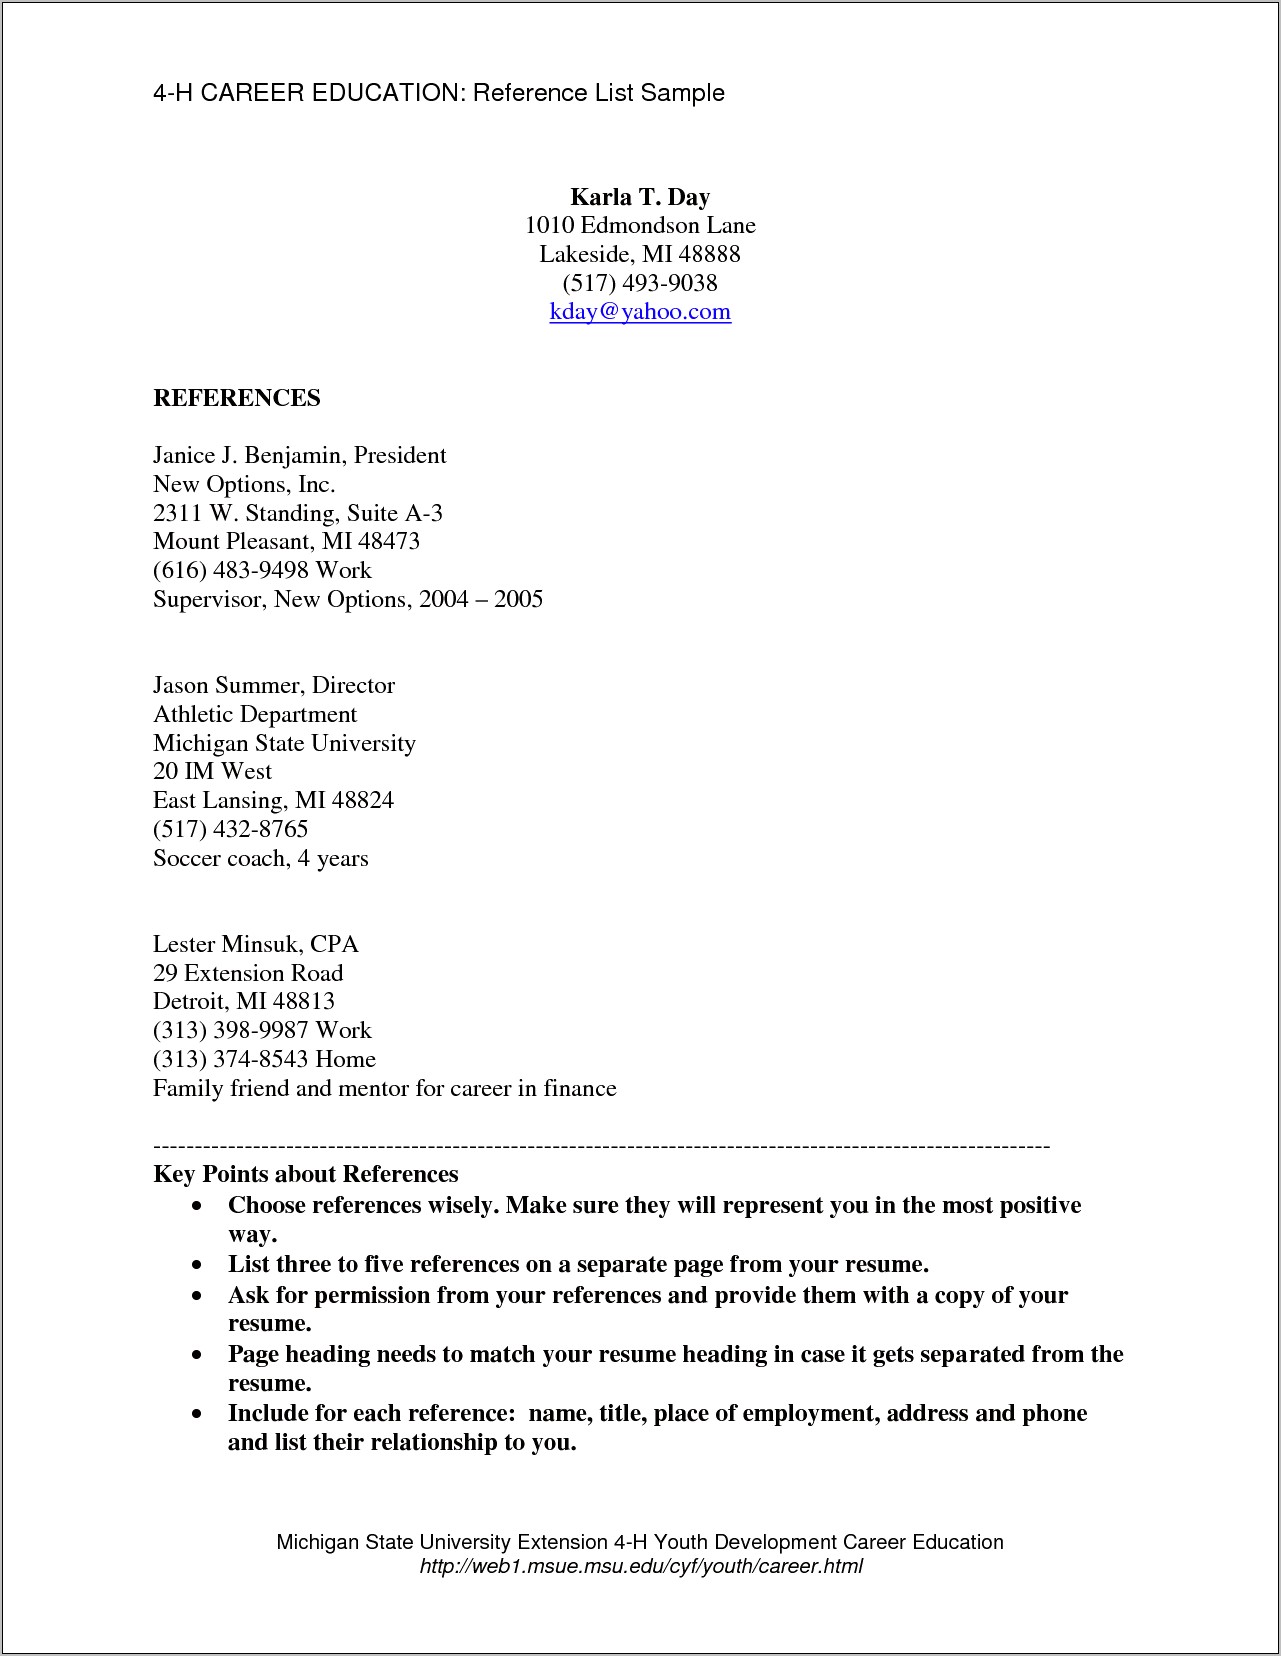 Sample Resume With References Upon Request